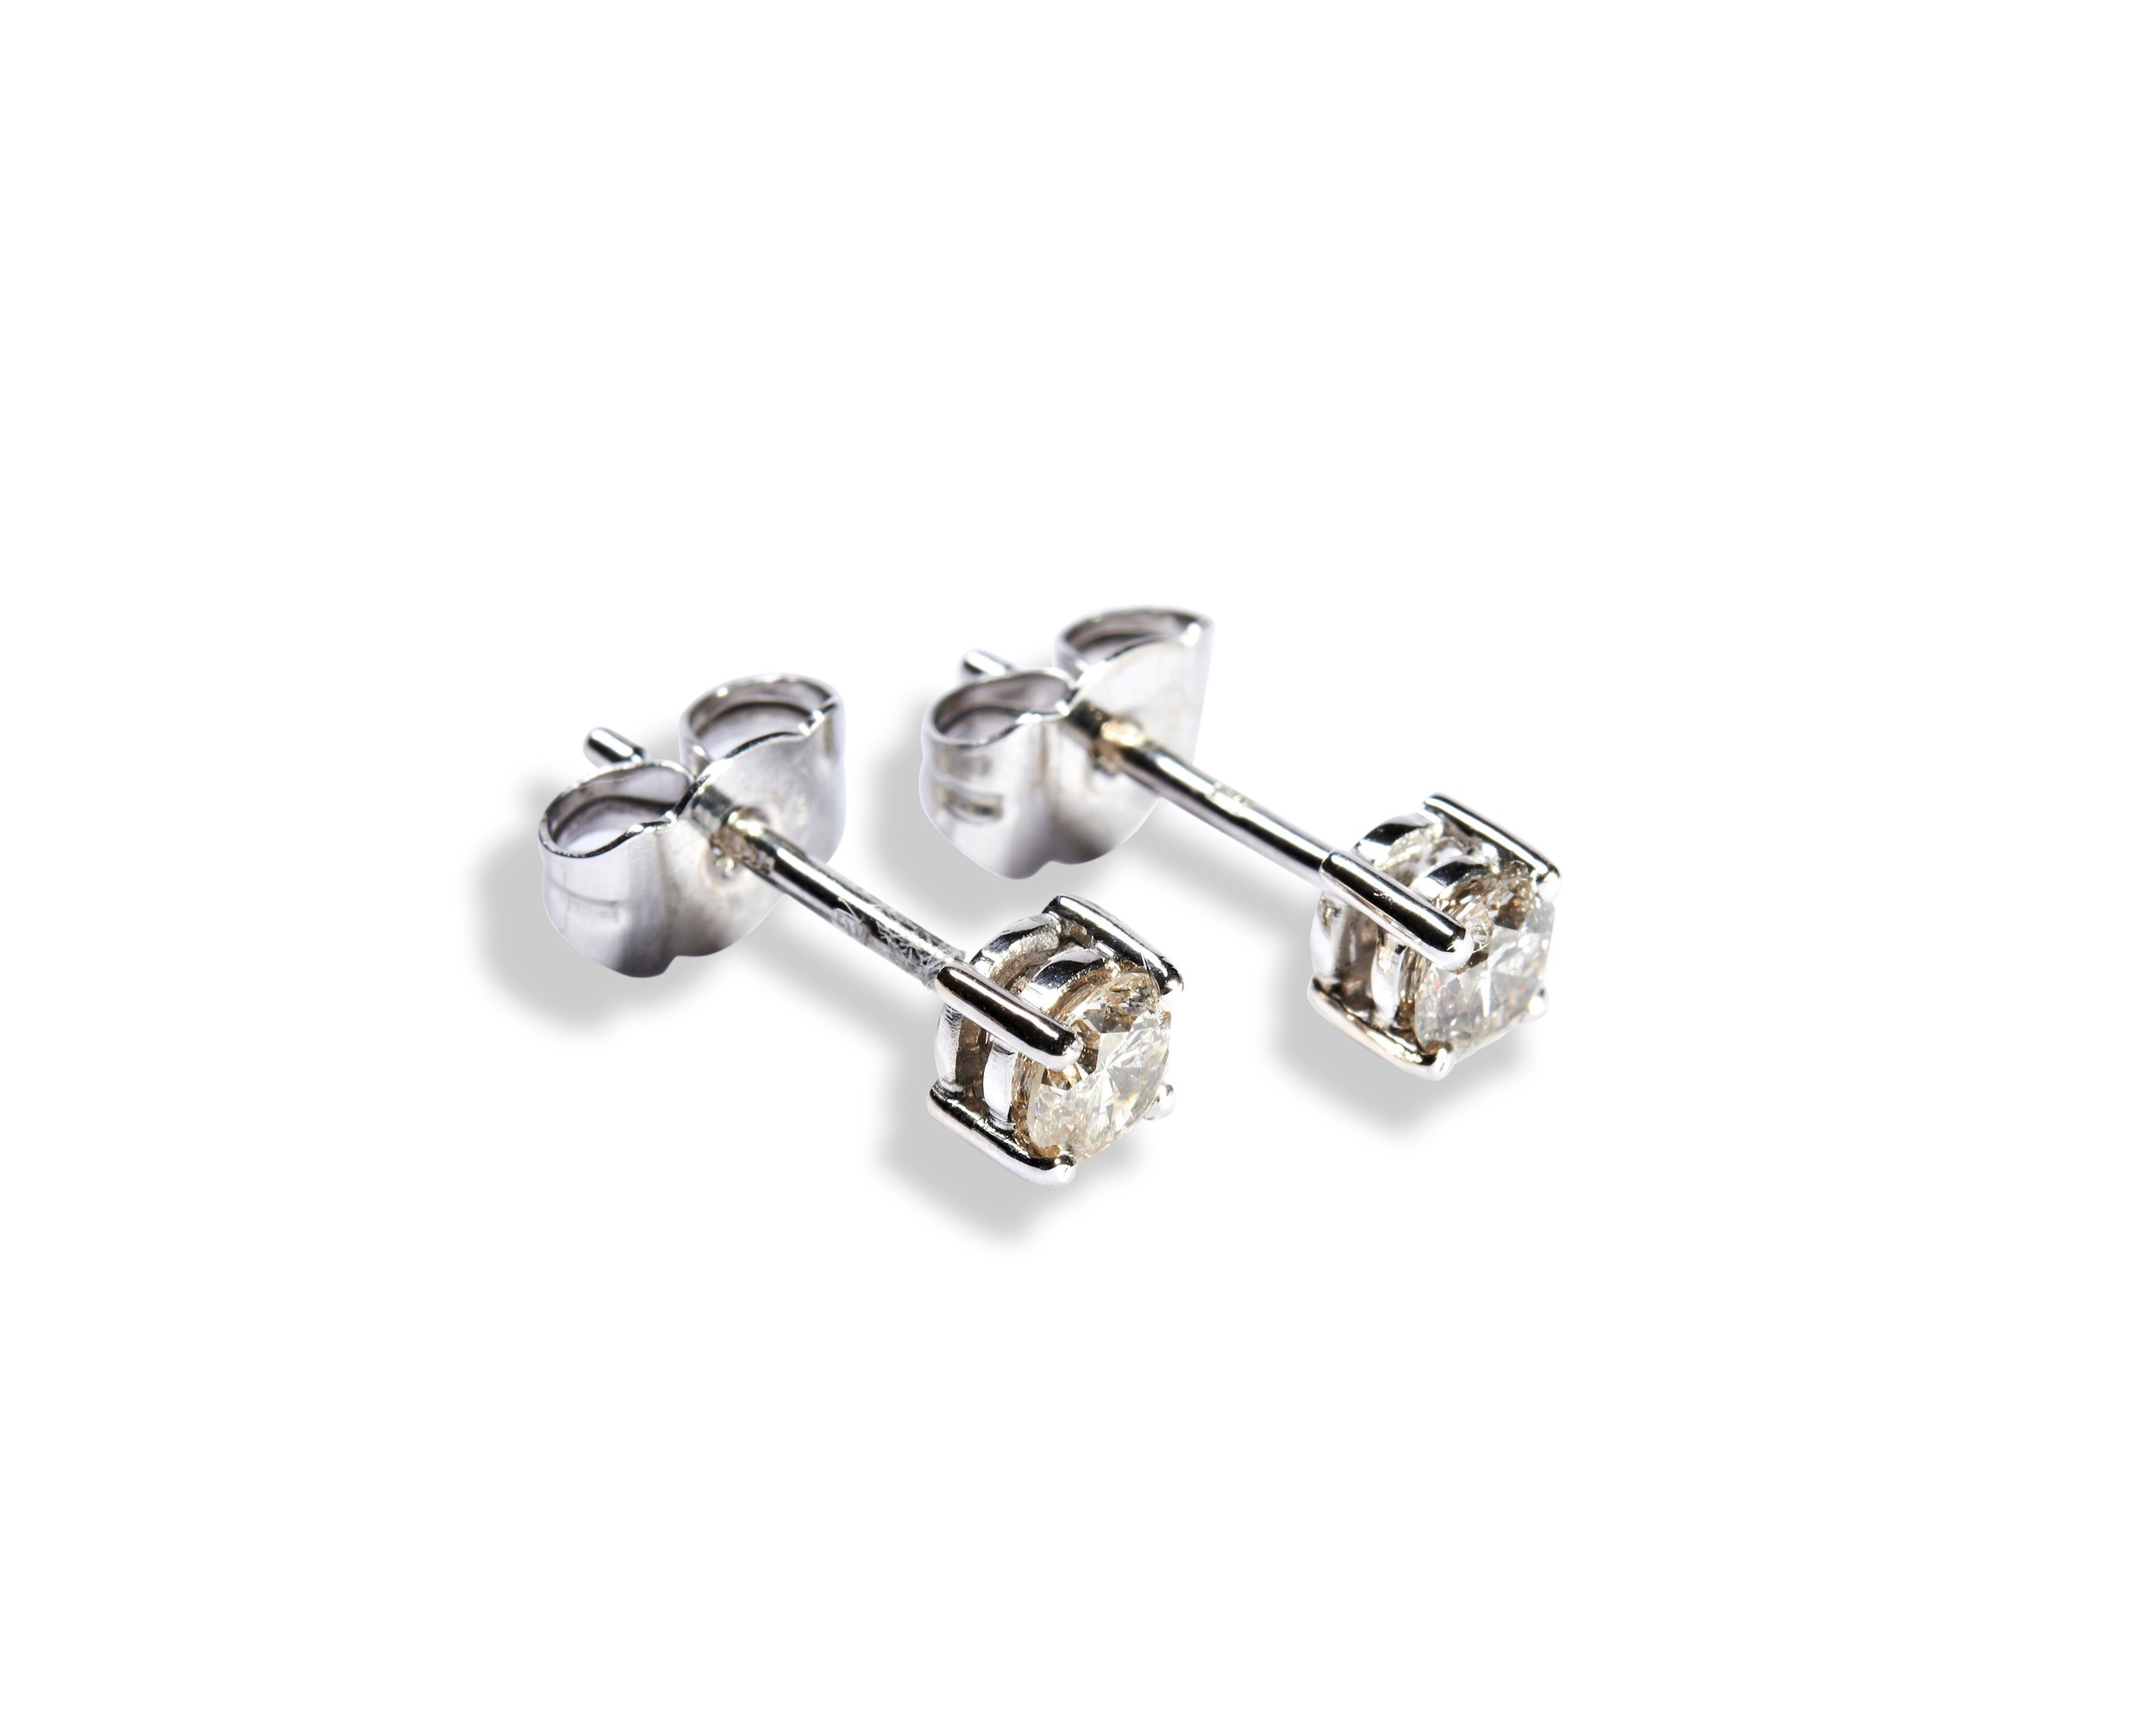 A PAIR OF DIAMOND STUD EARRINGS each brilliant-cut diamond four claw set on a white gold post and